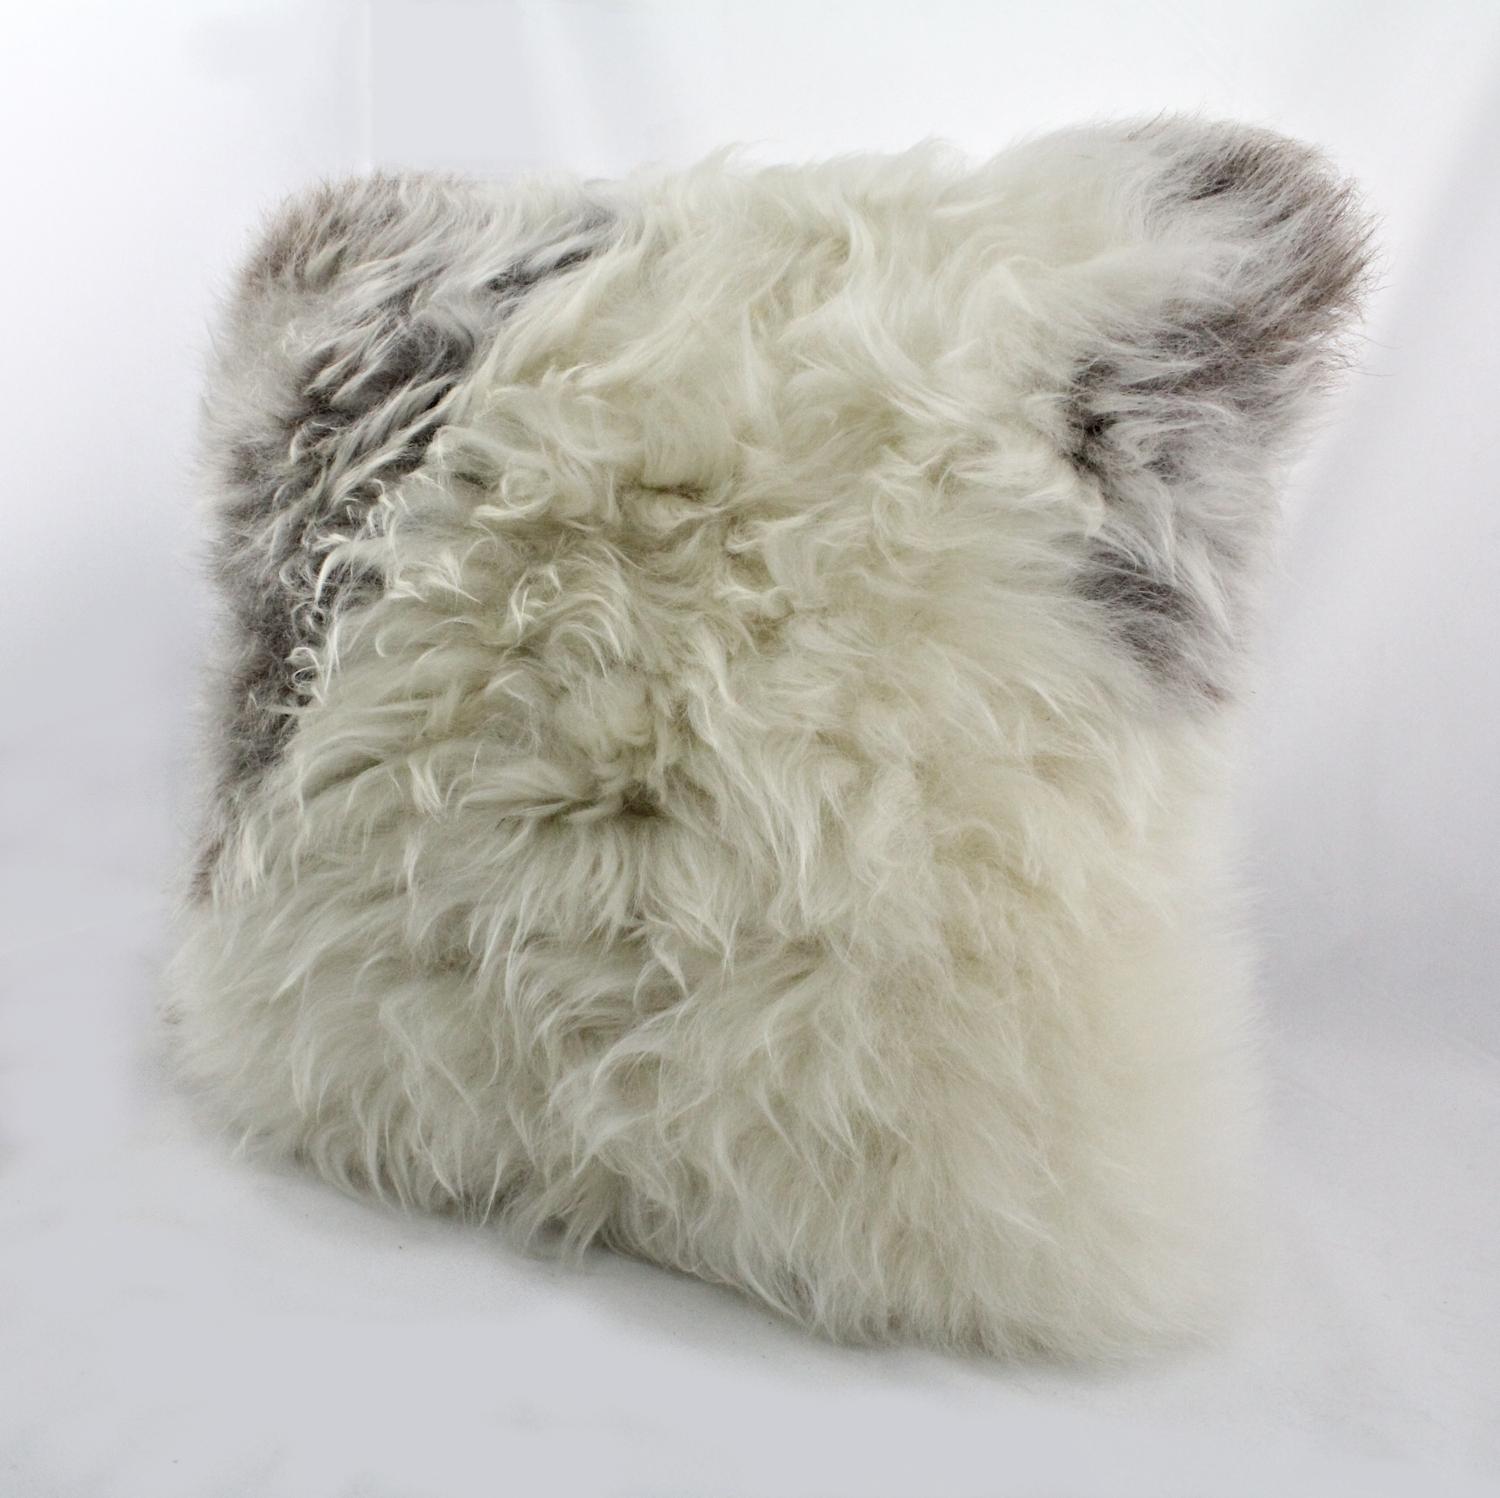 Create an atmosphere of cozy comfort layering a chair or sofa with this alluring shaggy wool, sheepskin pillow. Handcrafted from high quality Tibetan sheepskin preserving the natural beauty of the woolen fleece and earthy tones that bring warmth to